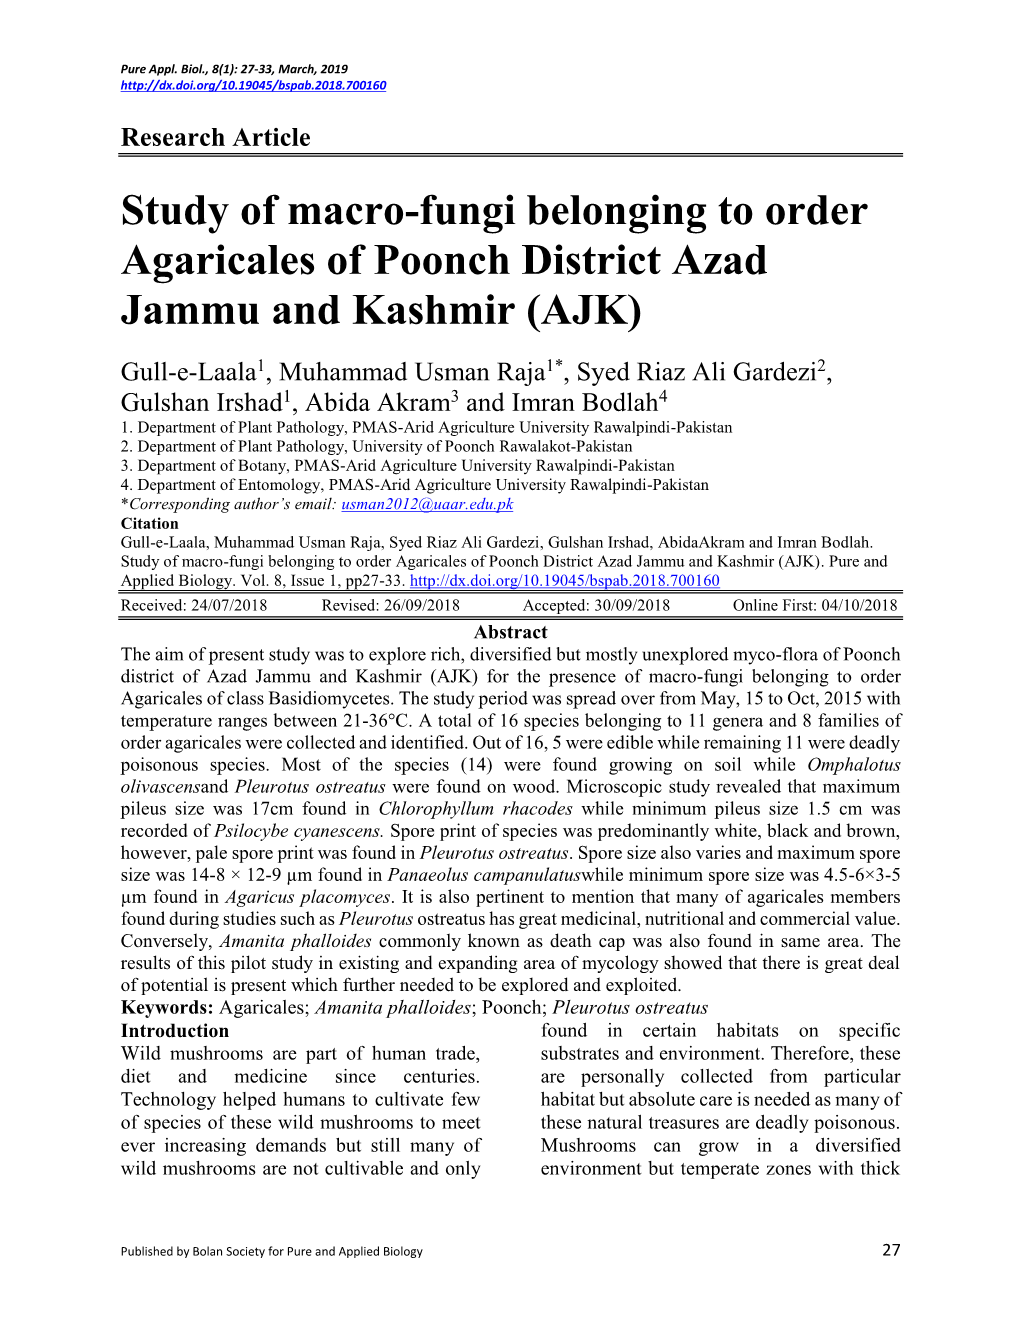 Study of Macro-Fungi Belonging to Order Agaricales of Poonch District Azad Jammu and Kashmir (AJK)